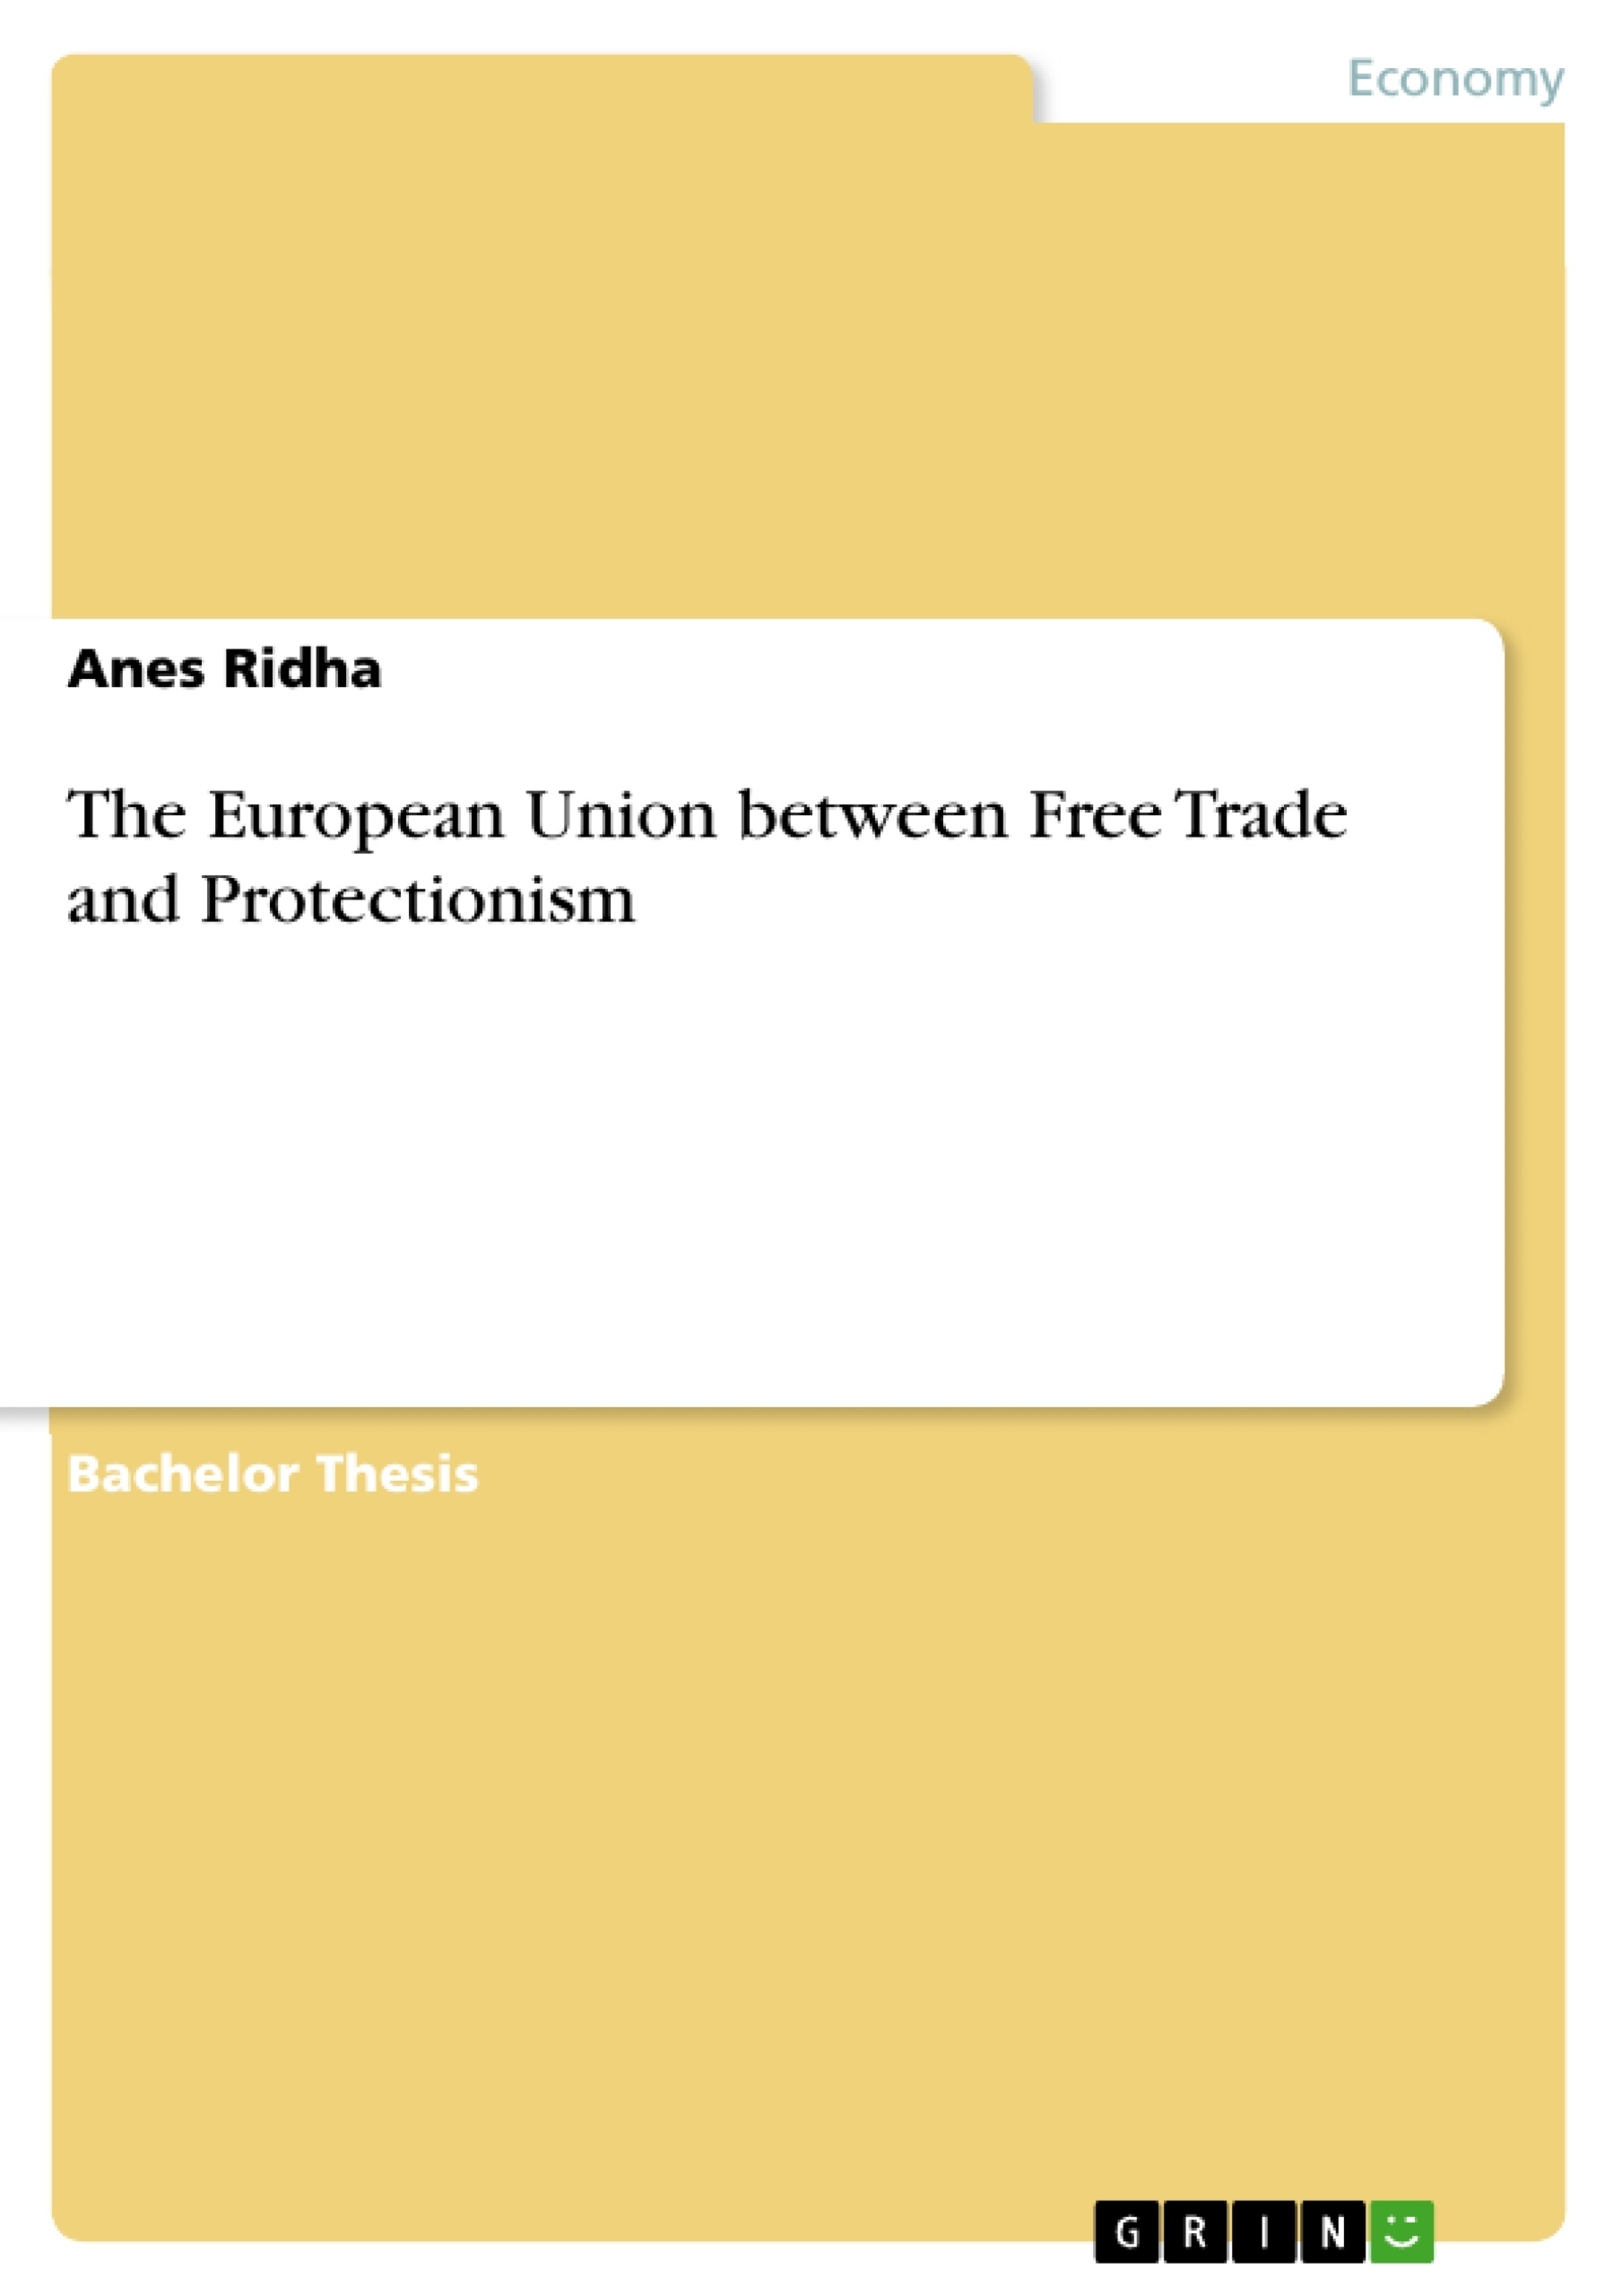 Title: The European Union between Free Trade and Protectionism